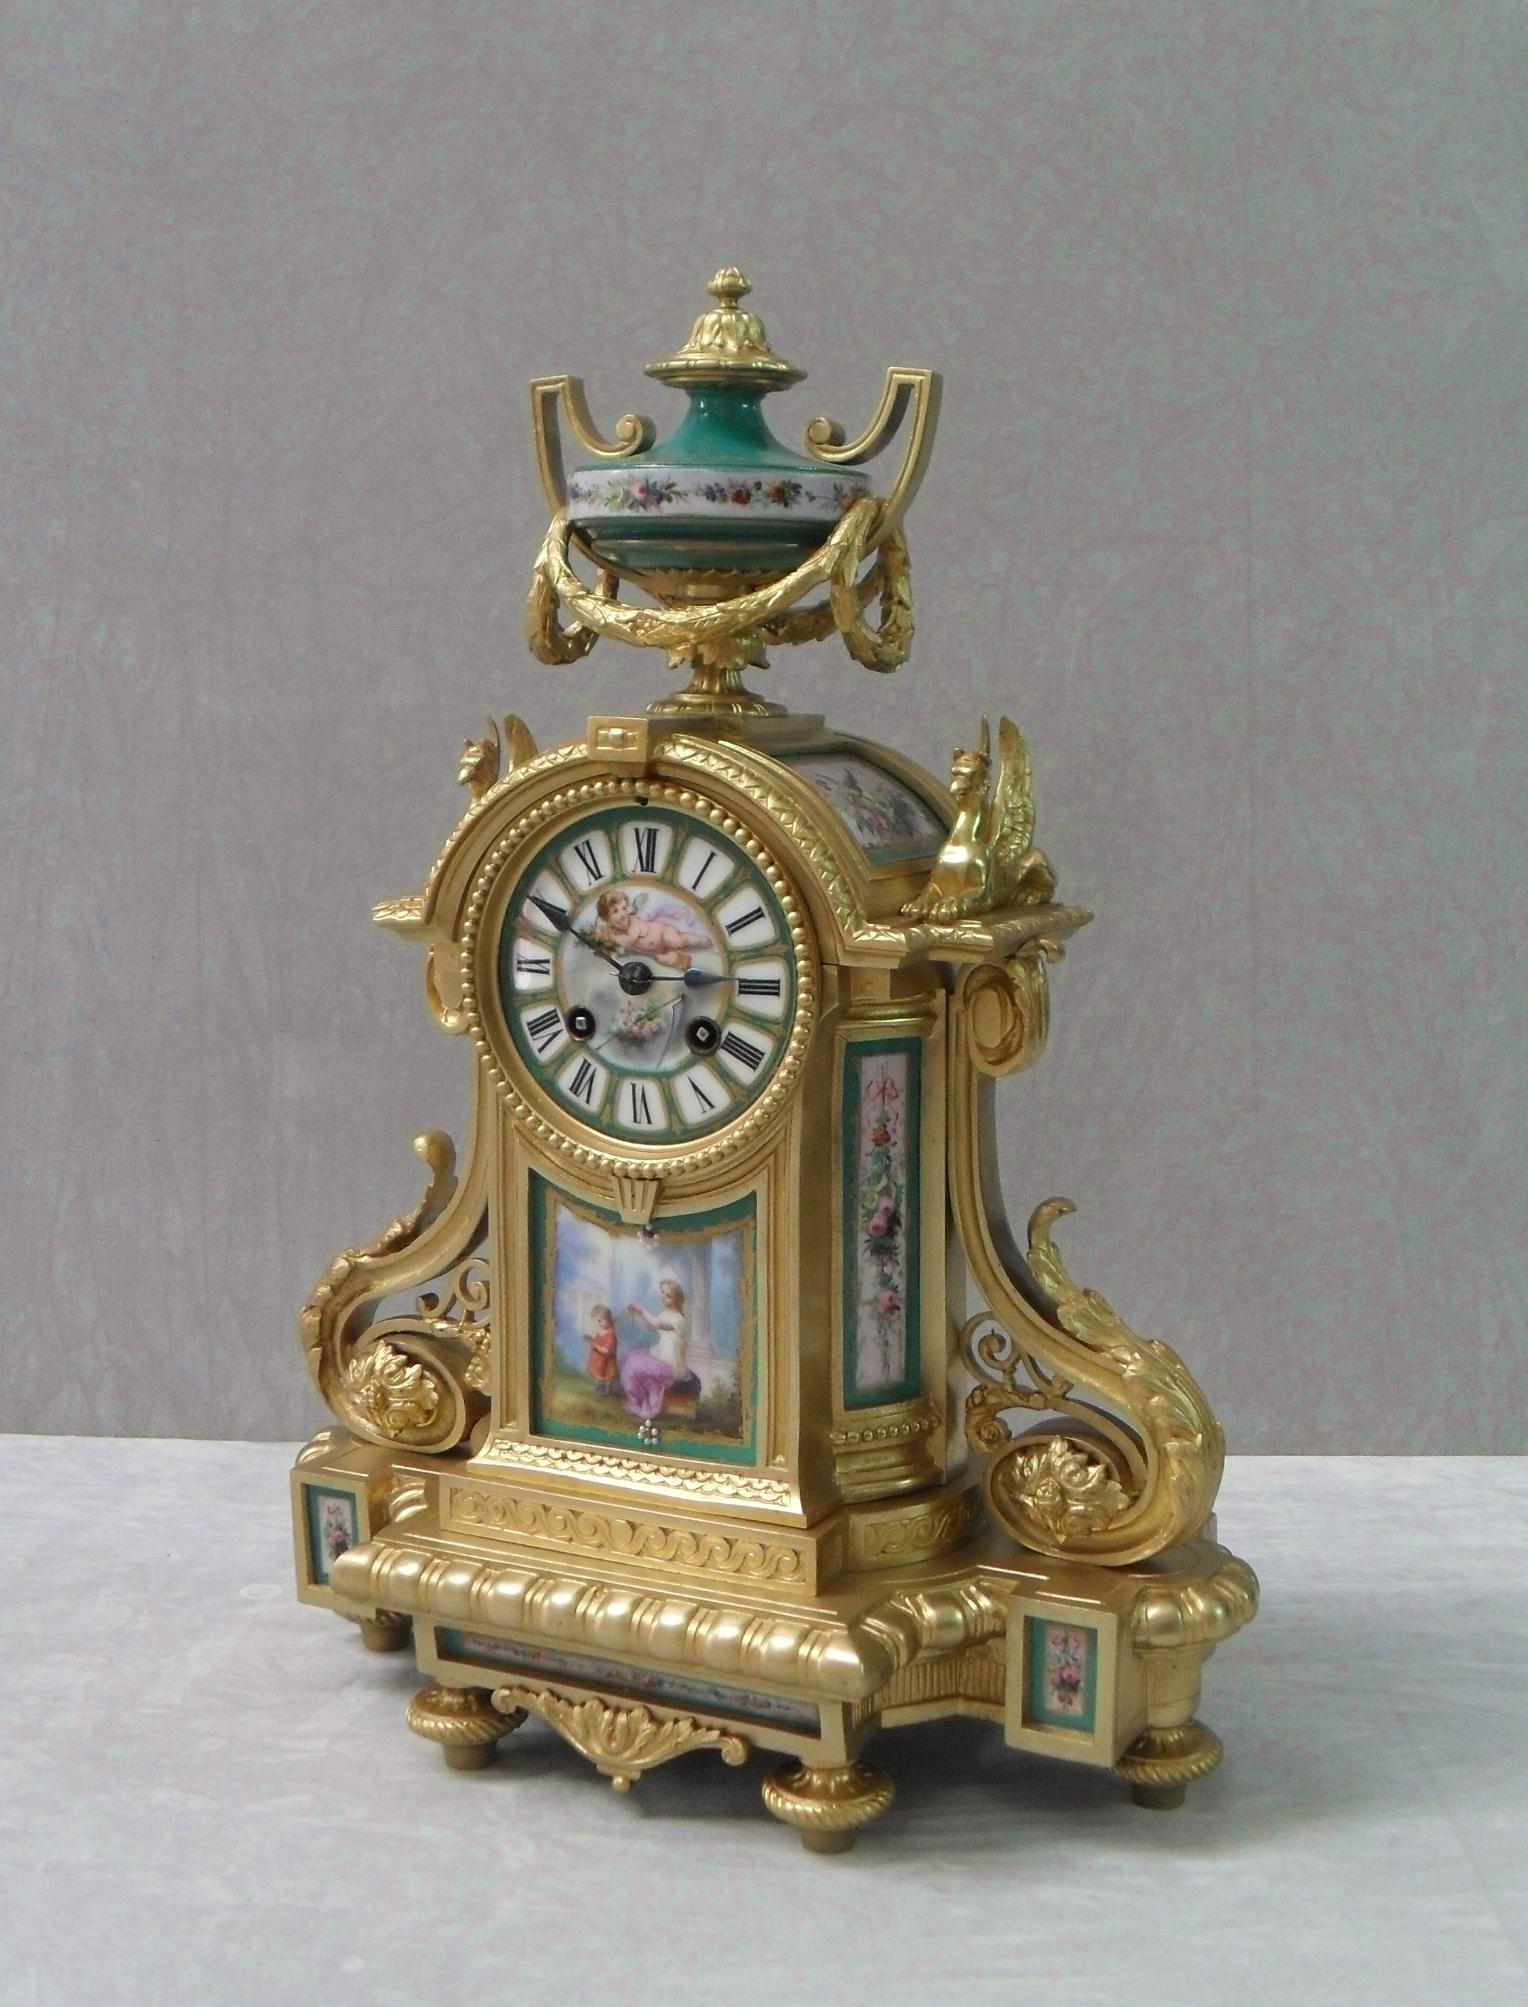 An excellent quality French Louis XVI style bronze gilt mantel clock with bowed sides, moulded edges and scrolling design finished with two griffins and urn to the top. The clock has delicately hand-painted porcelain Sevré style panels of flowers,